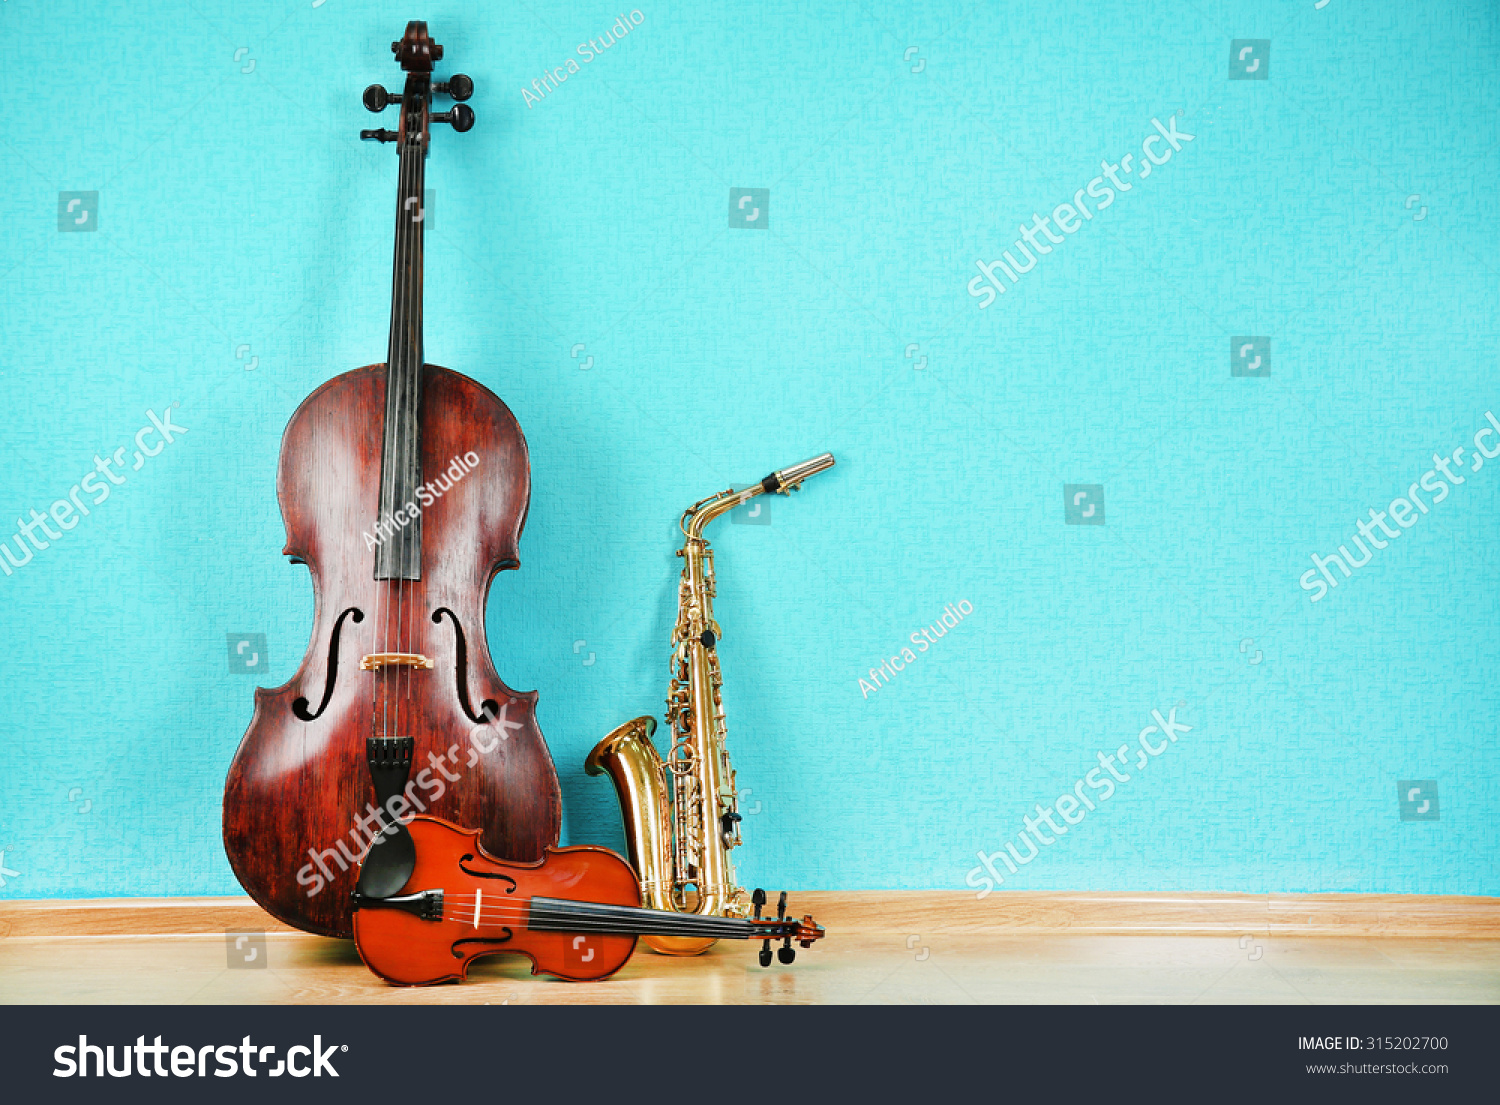 Musical instruments on turquoise wallpaper background #315202700